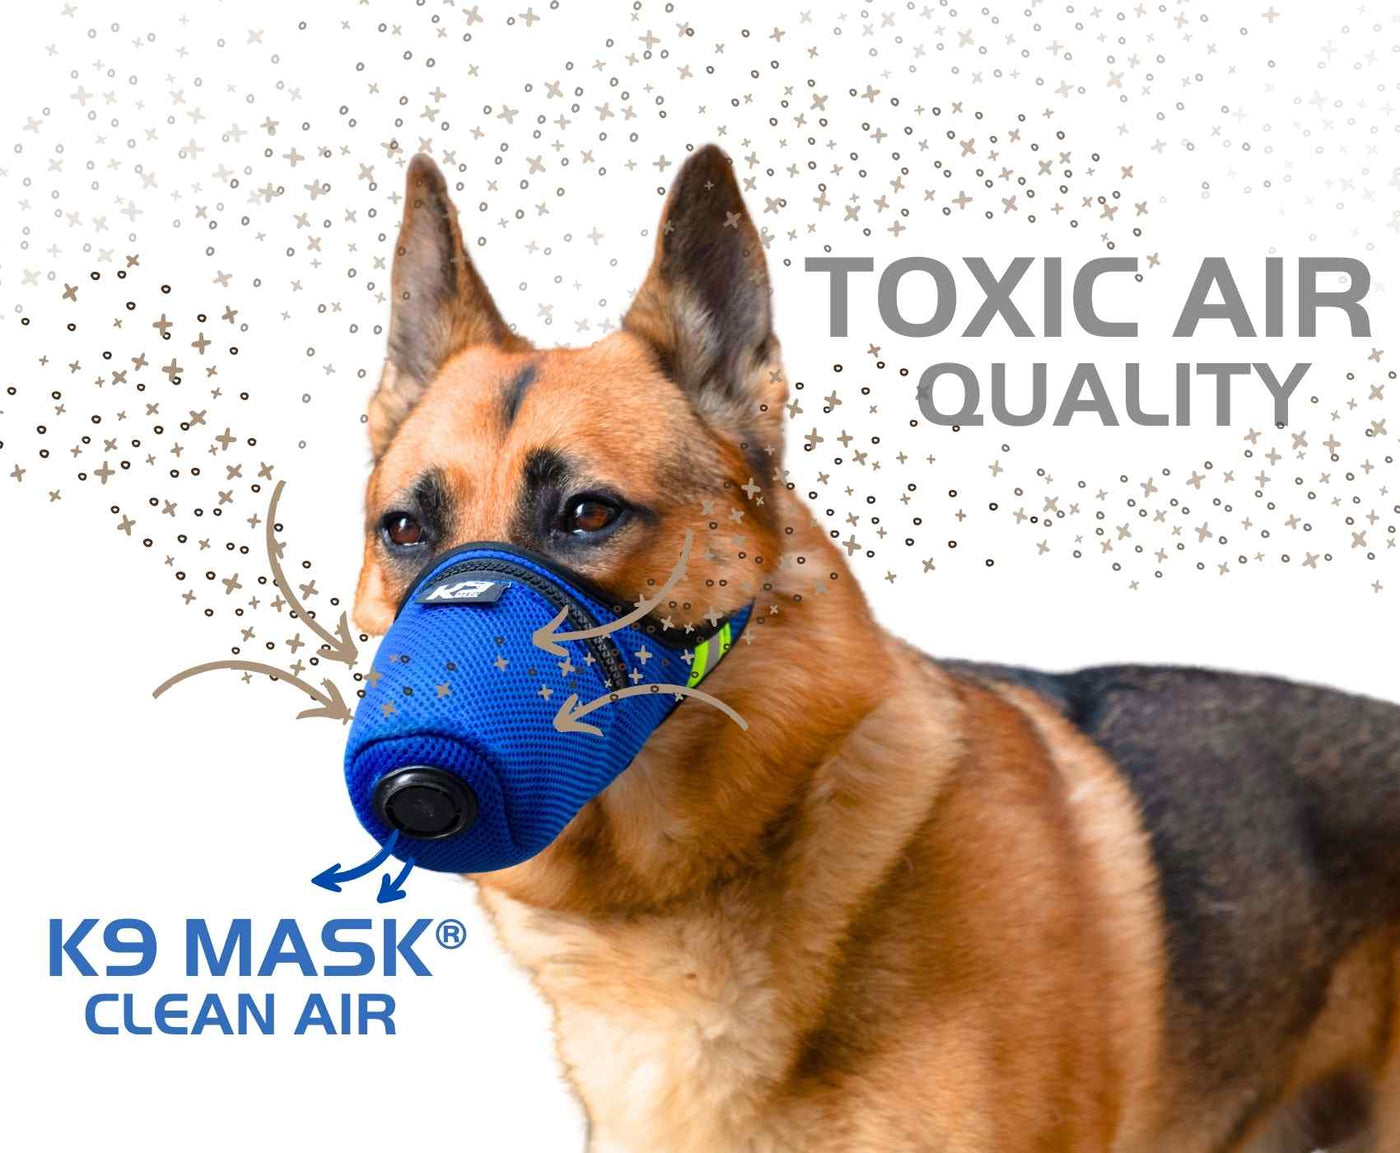 K9 Mask Pm10 Clean Breather Toxic Air Quality Dog Air Filter for Lint, Dust, Ash, Ozone